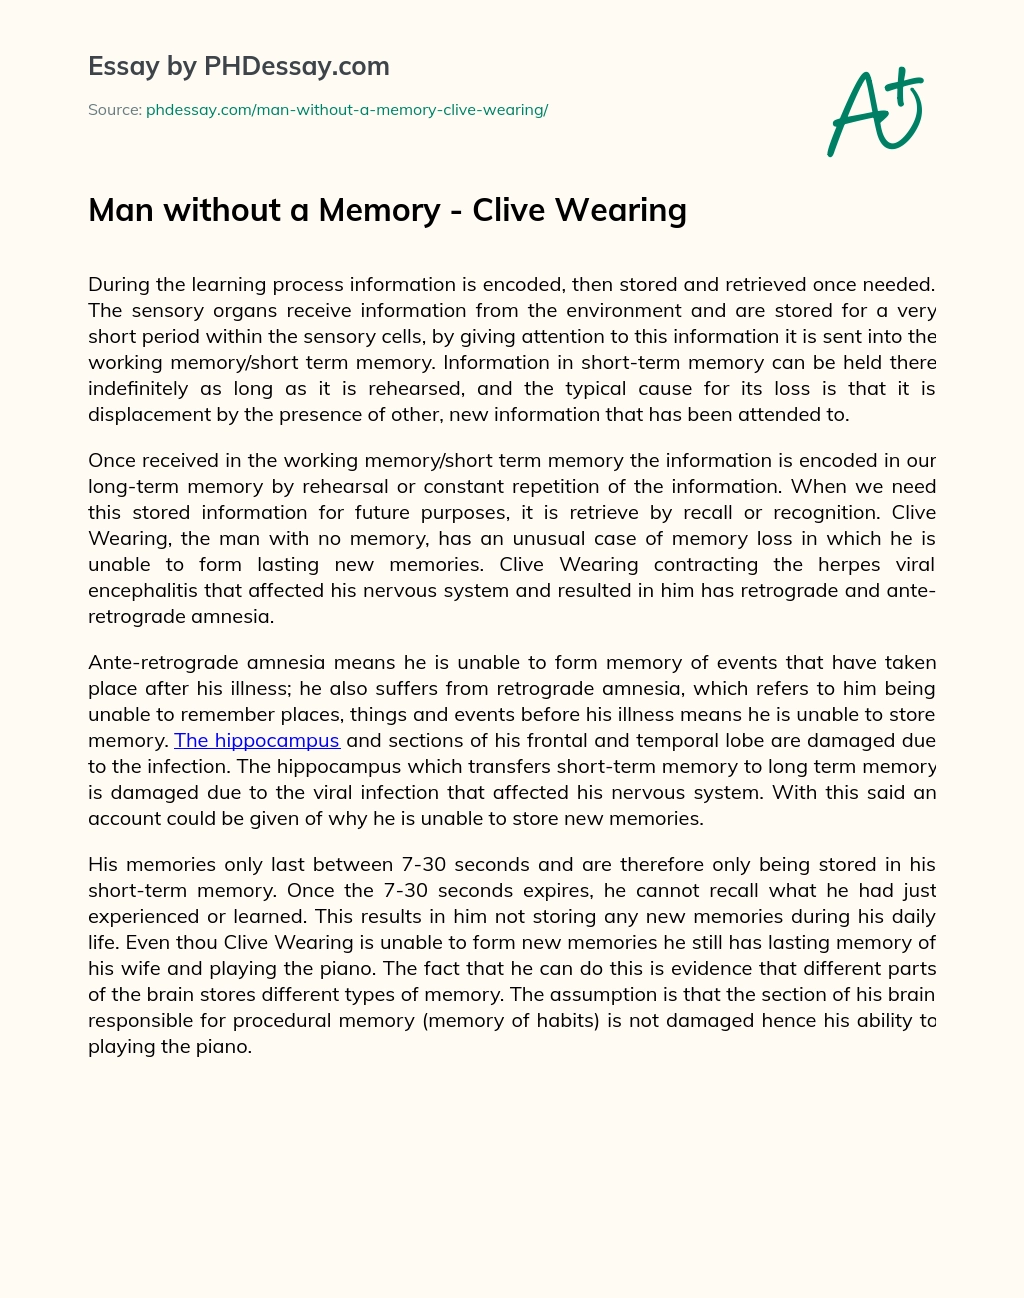 Man without a Memory – Clive Wearing essay